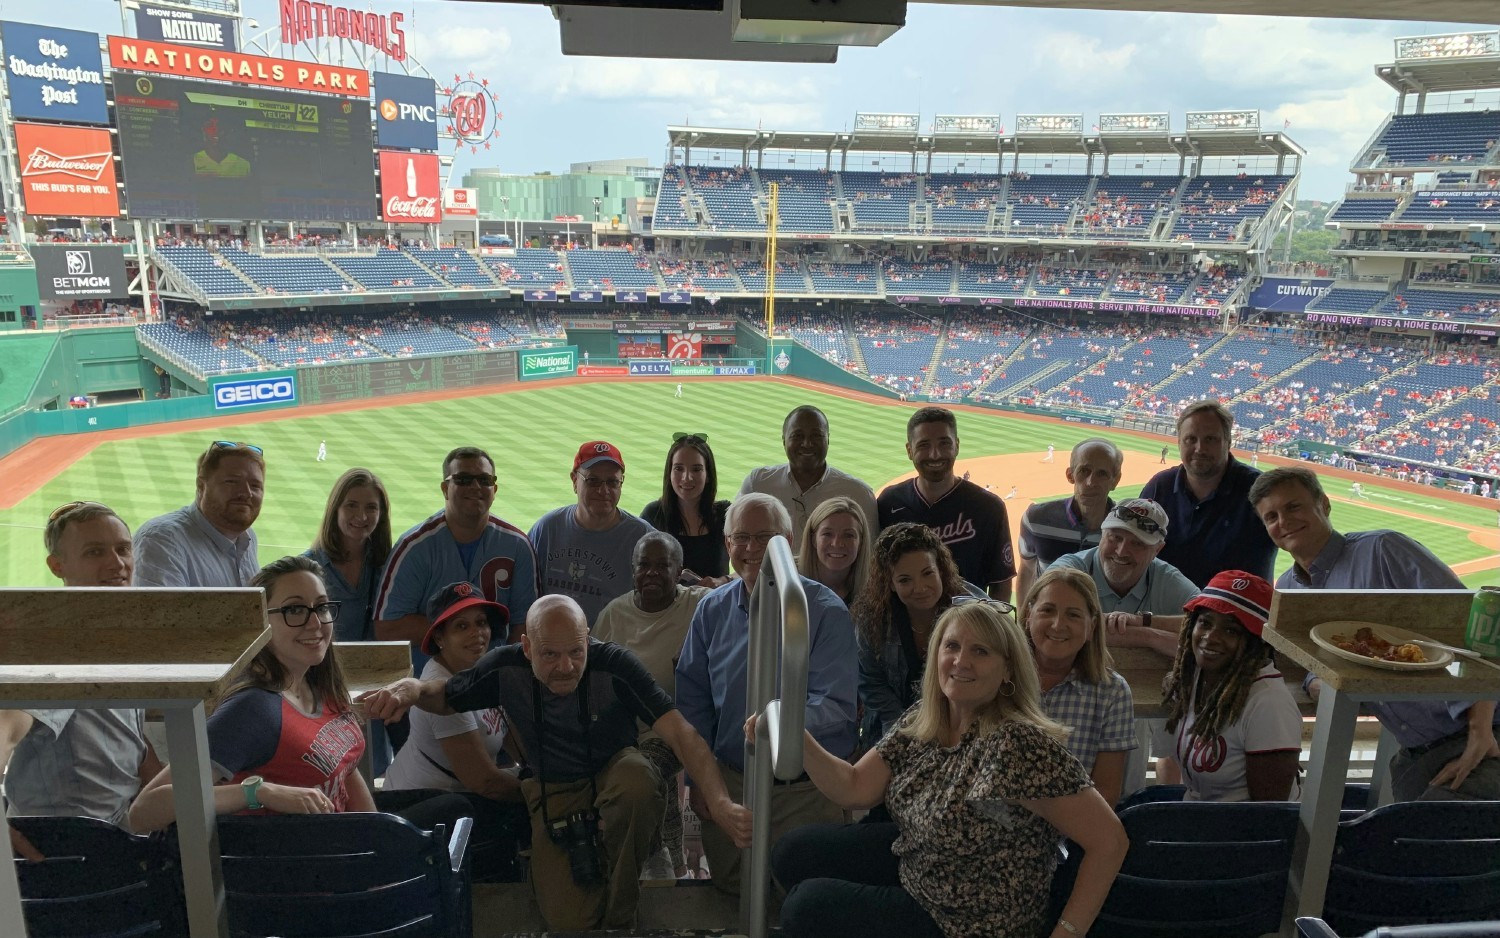 Some of our Washington, DC team members enjoying a Nationals game at Nationals Park.